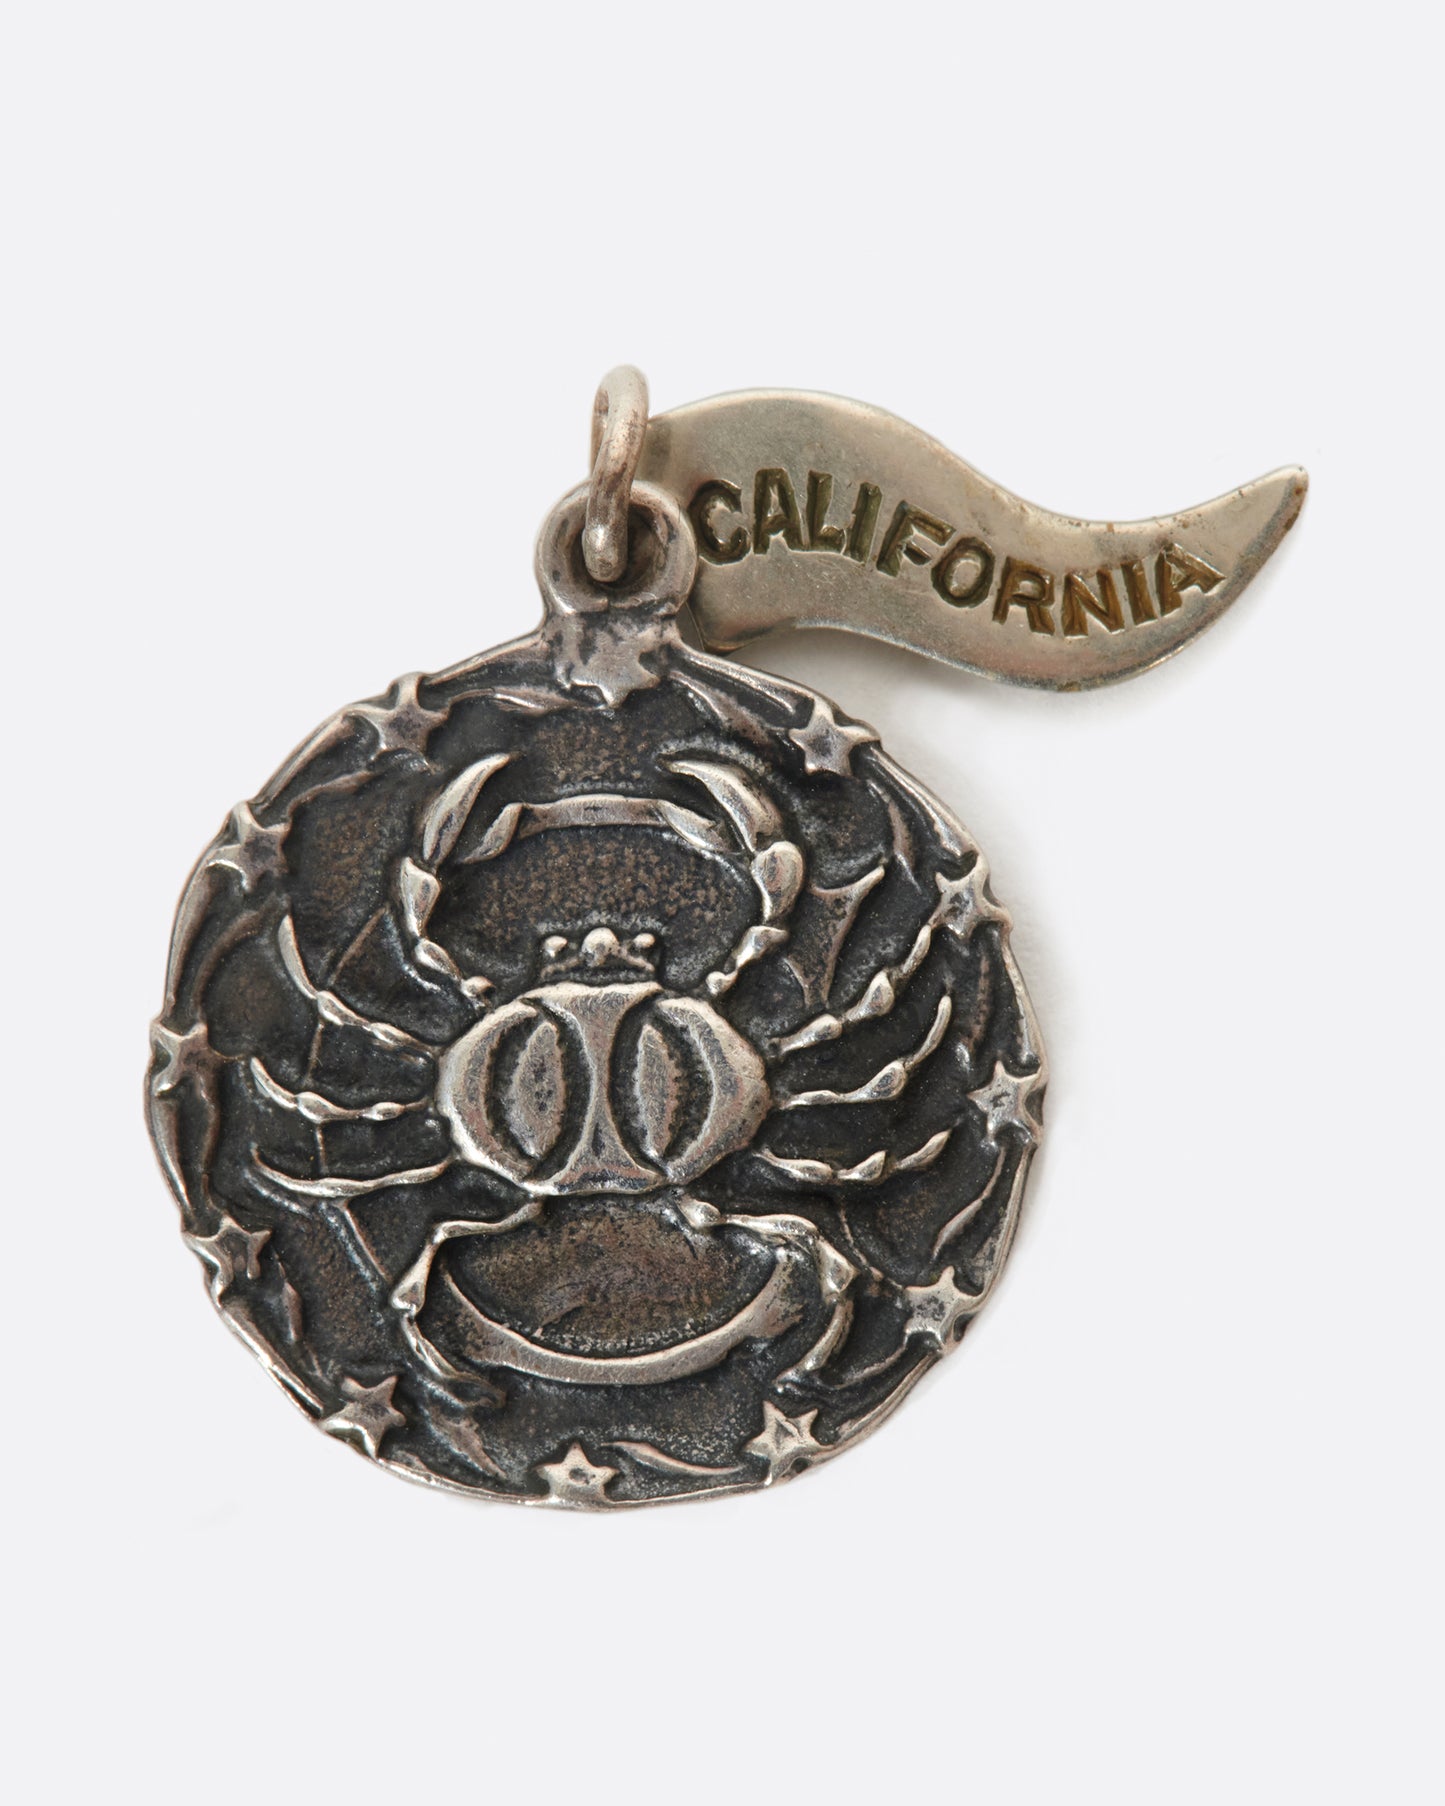 A round medal pendant with your zodiac sign and a California pennant.